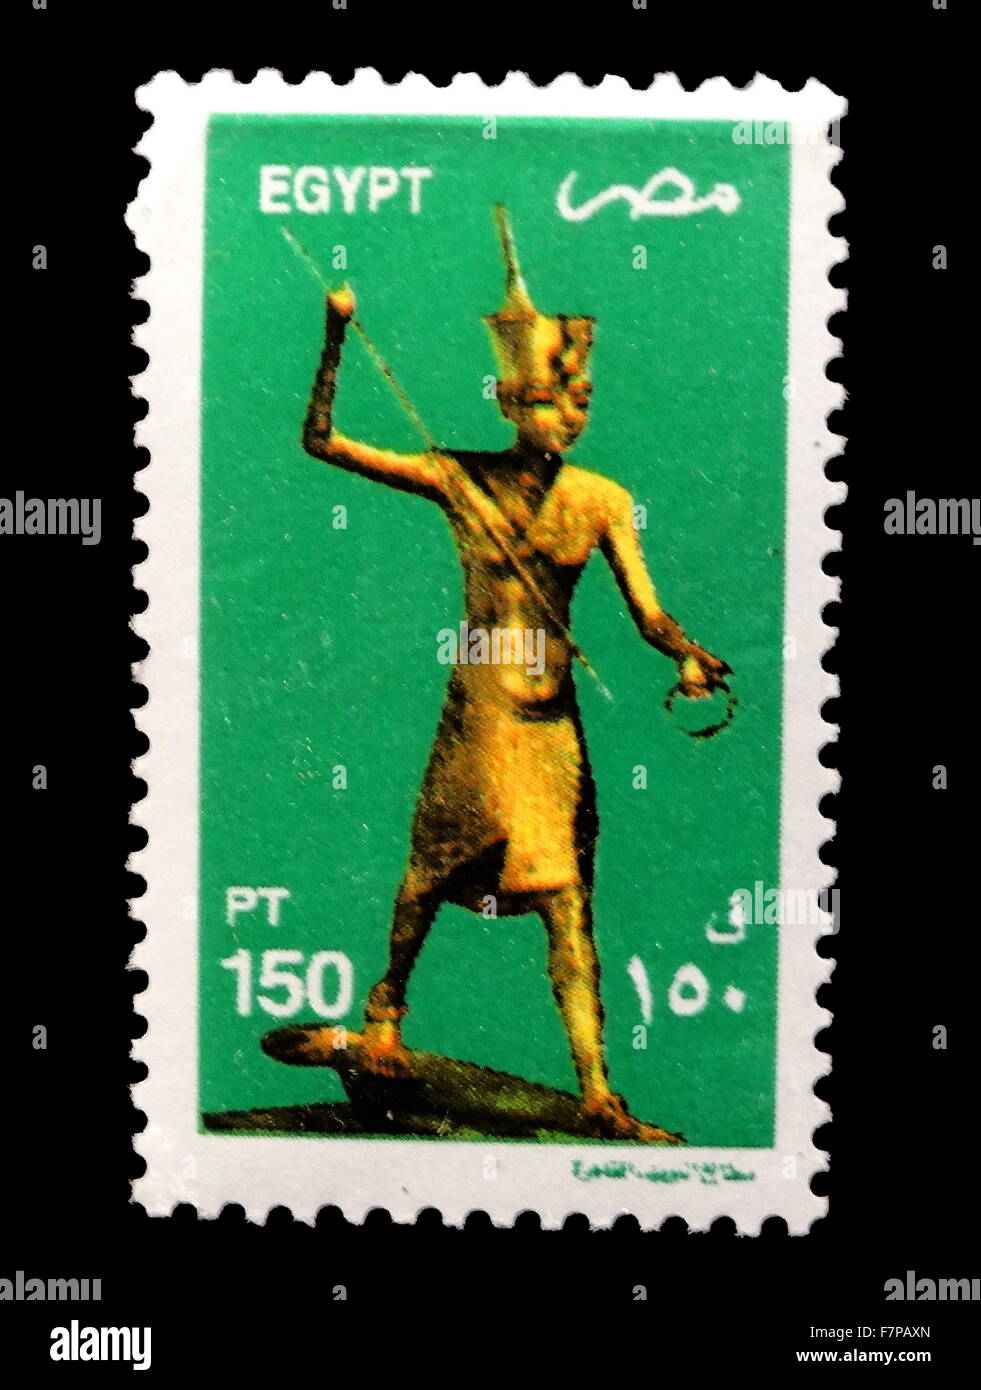 2000; Egyptian postage stamps with artifact from the Tomb of Tutankhamun, Egyptian pharaoh of the 18th dynasty (ruled ca. 1332–1323 BC). Stock Photo